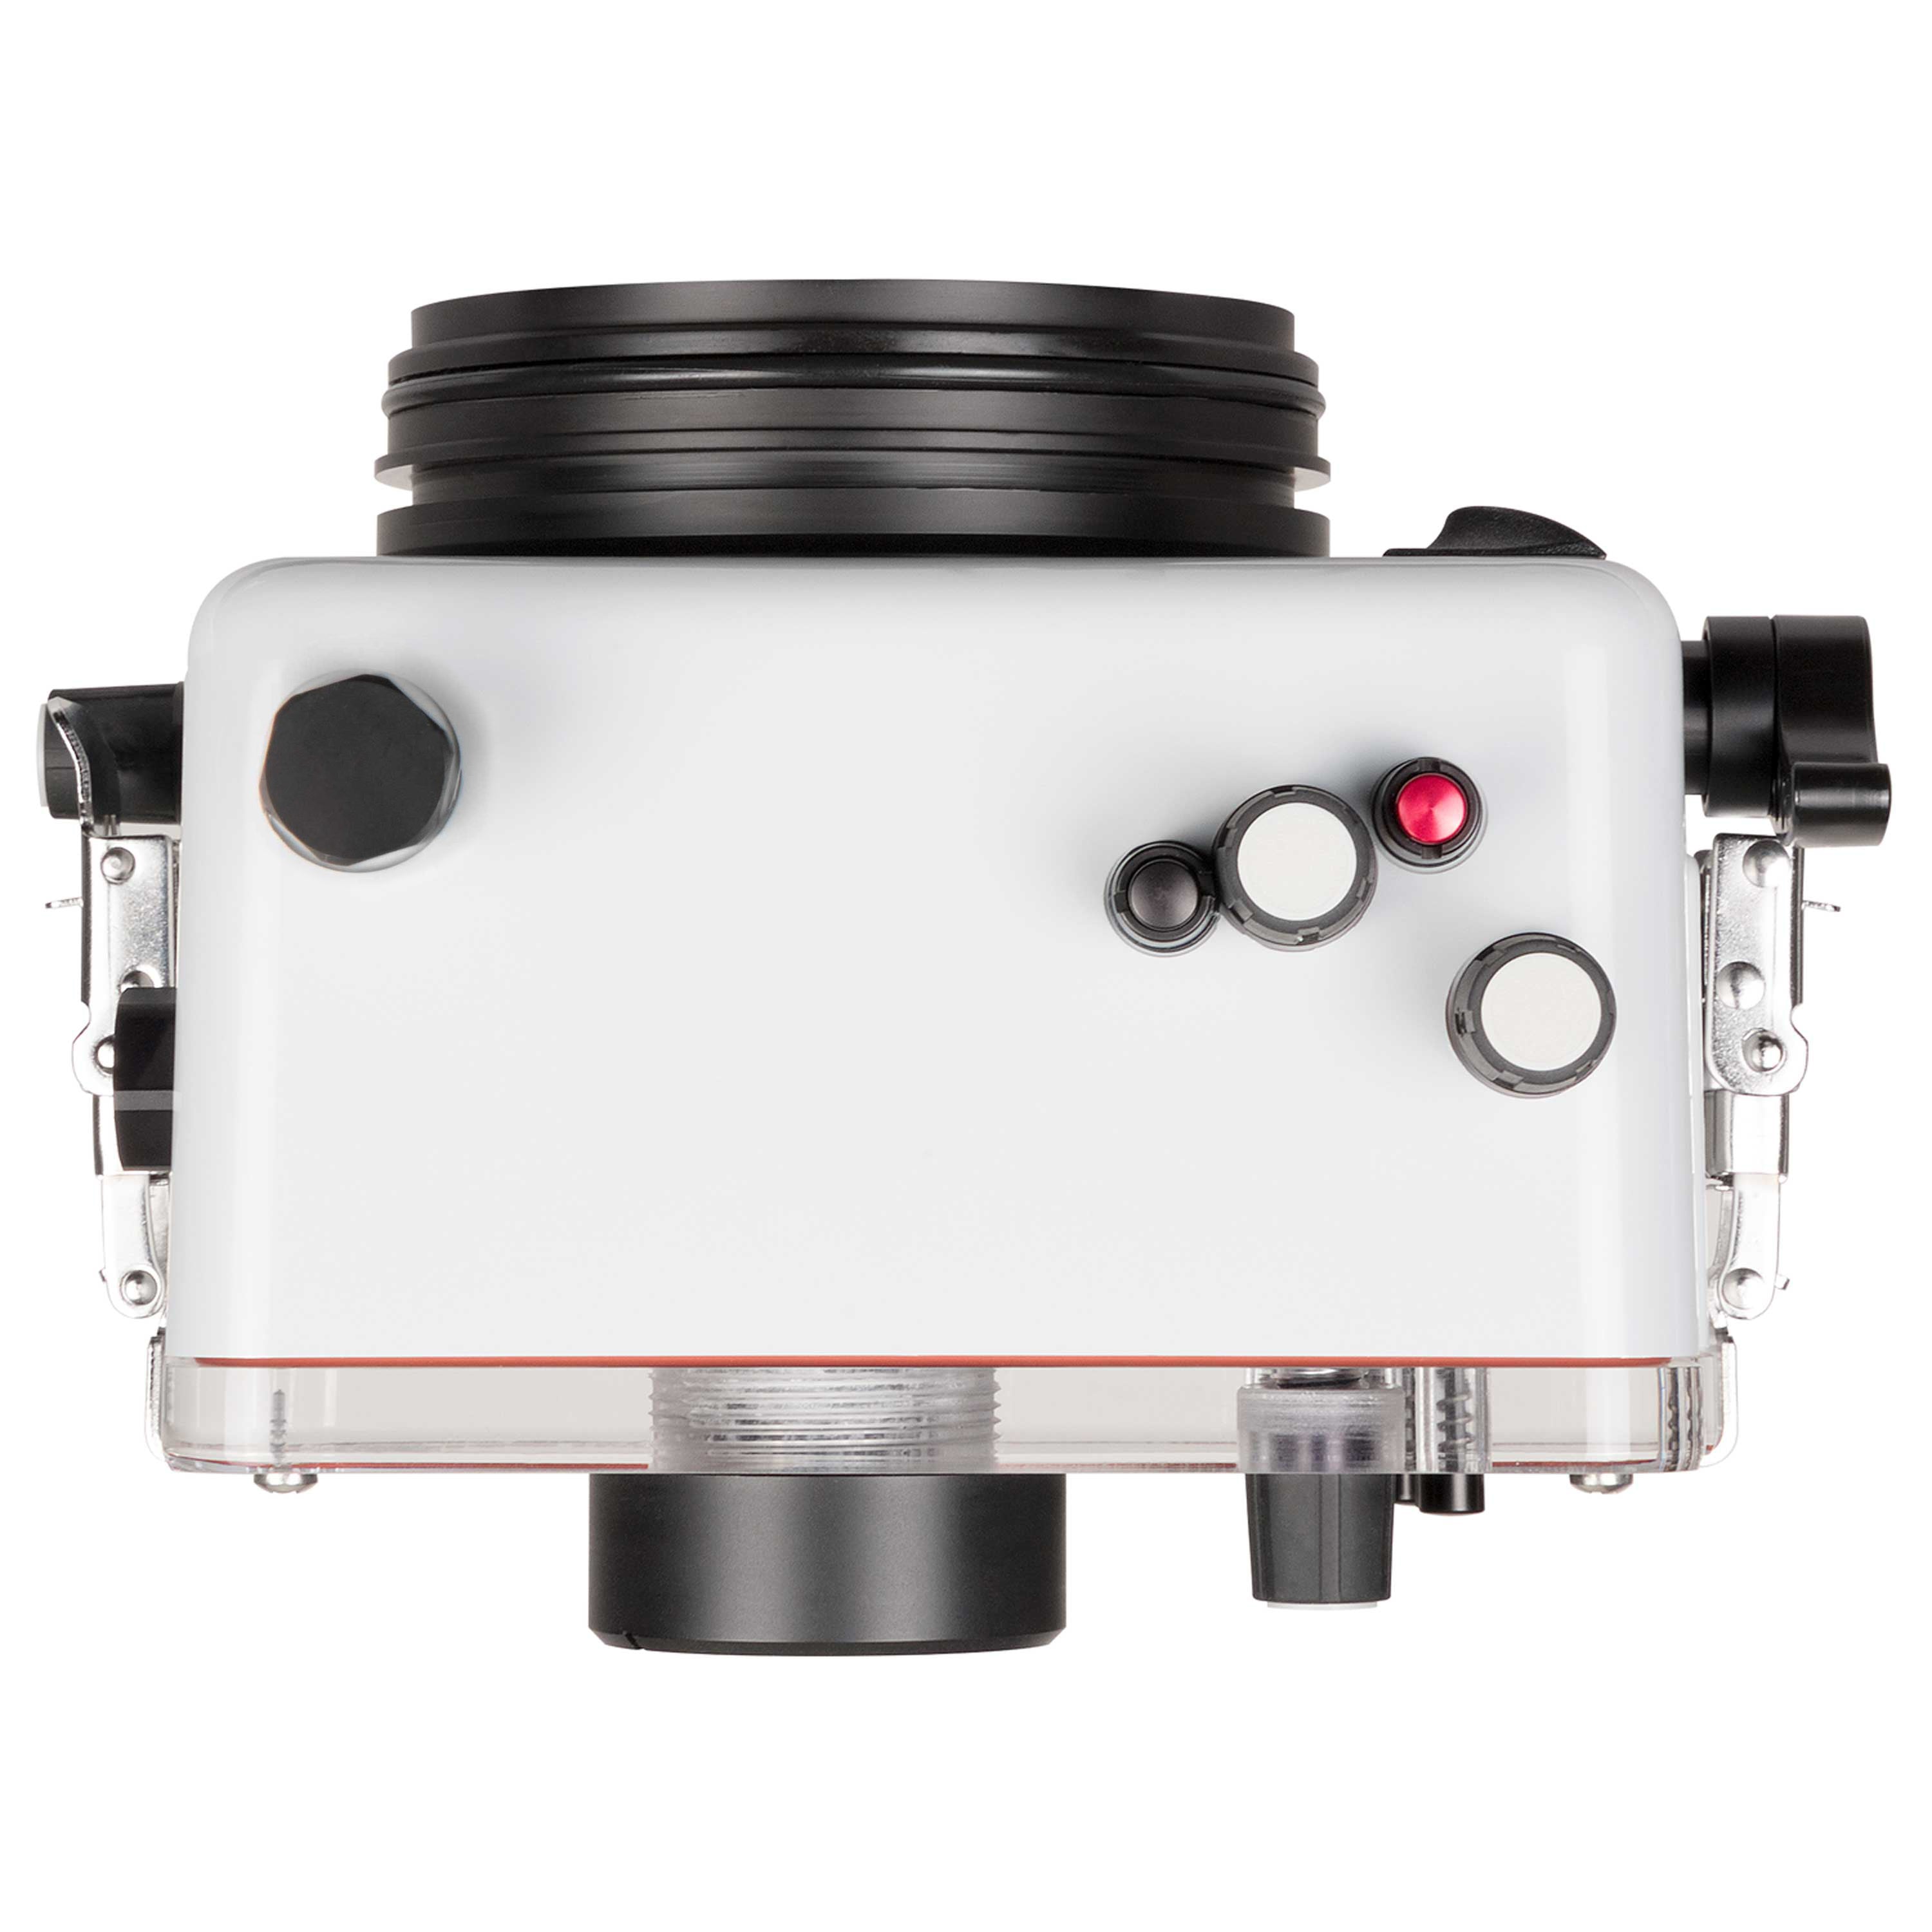 sikkerhed lukke lunken 200DLM/A Underwater Housing for Canon EOS M50, M50 II, Kiss M Mirrorle